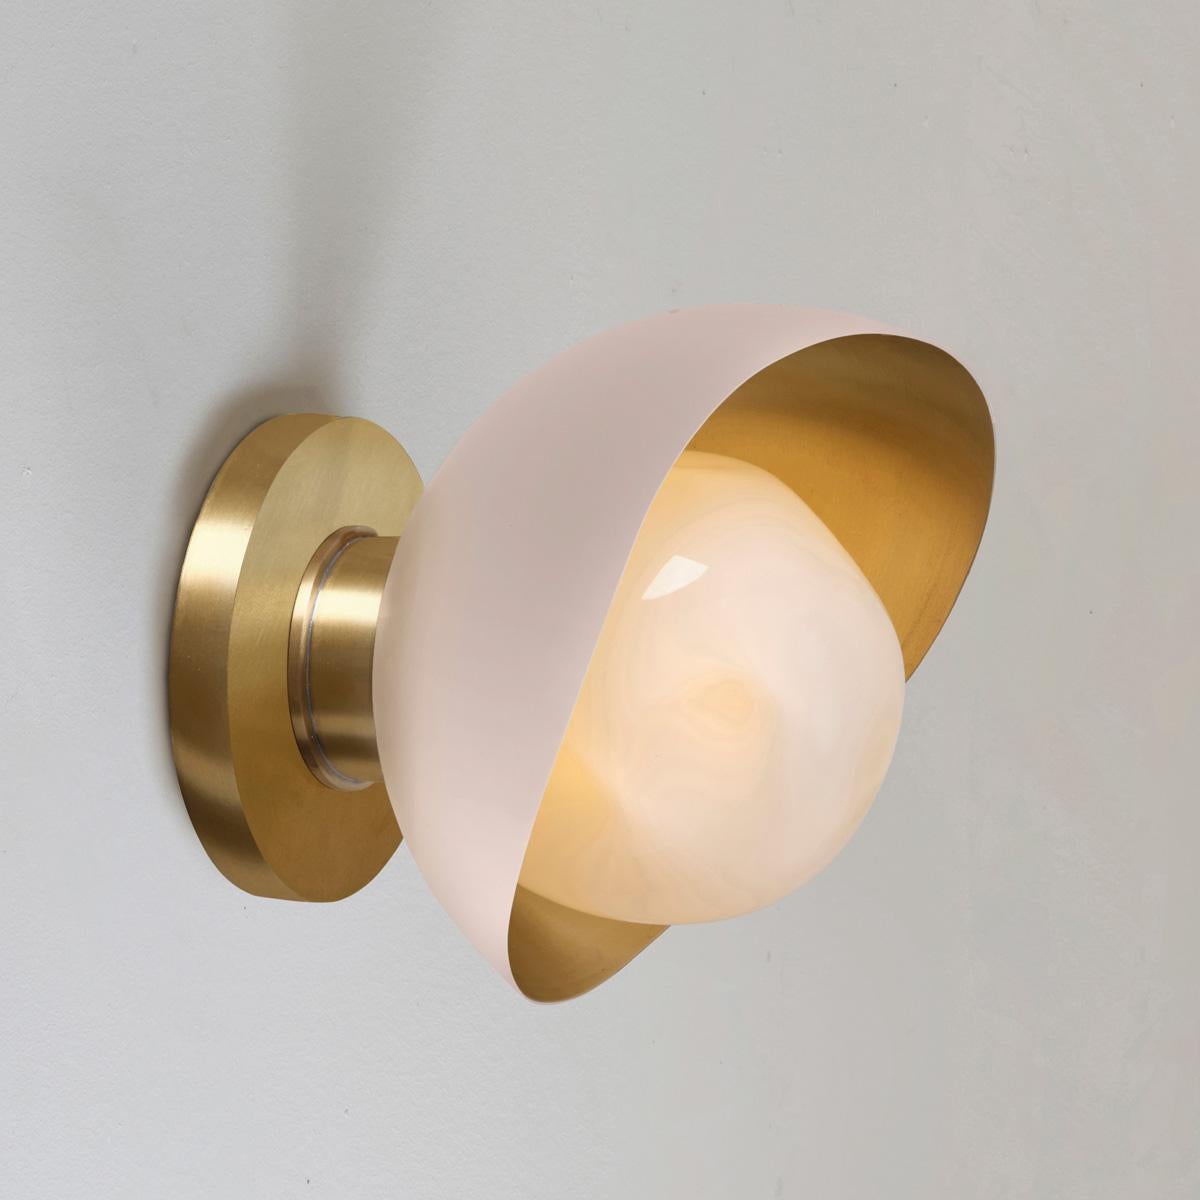 Perla Mini Wall Light by Gaspare Asaro. Sand White and Satin Brass Finish For Sale 3